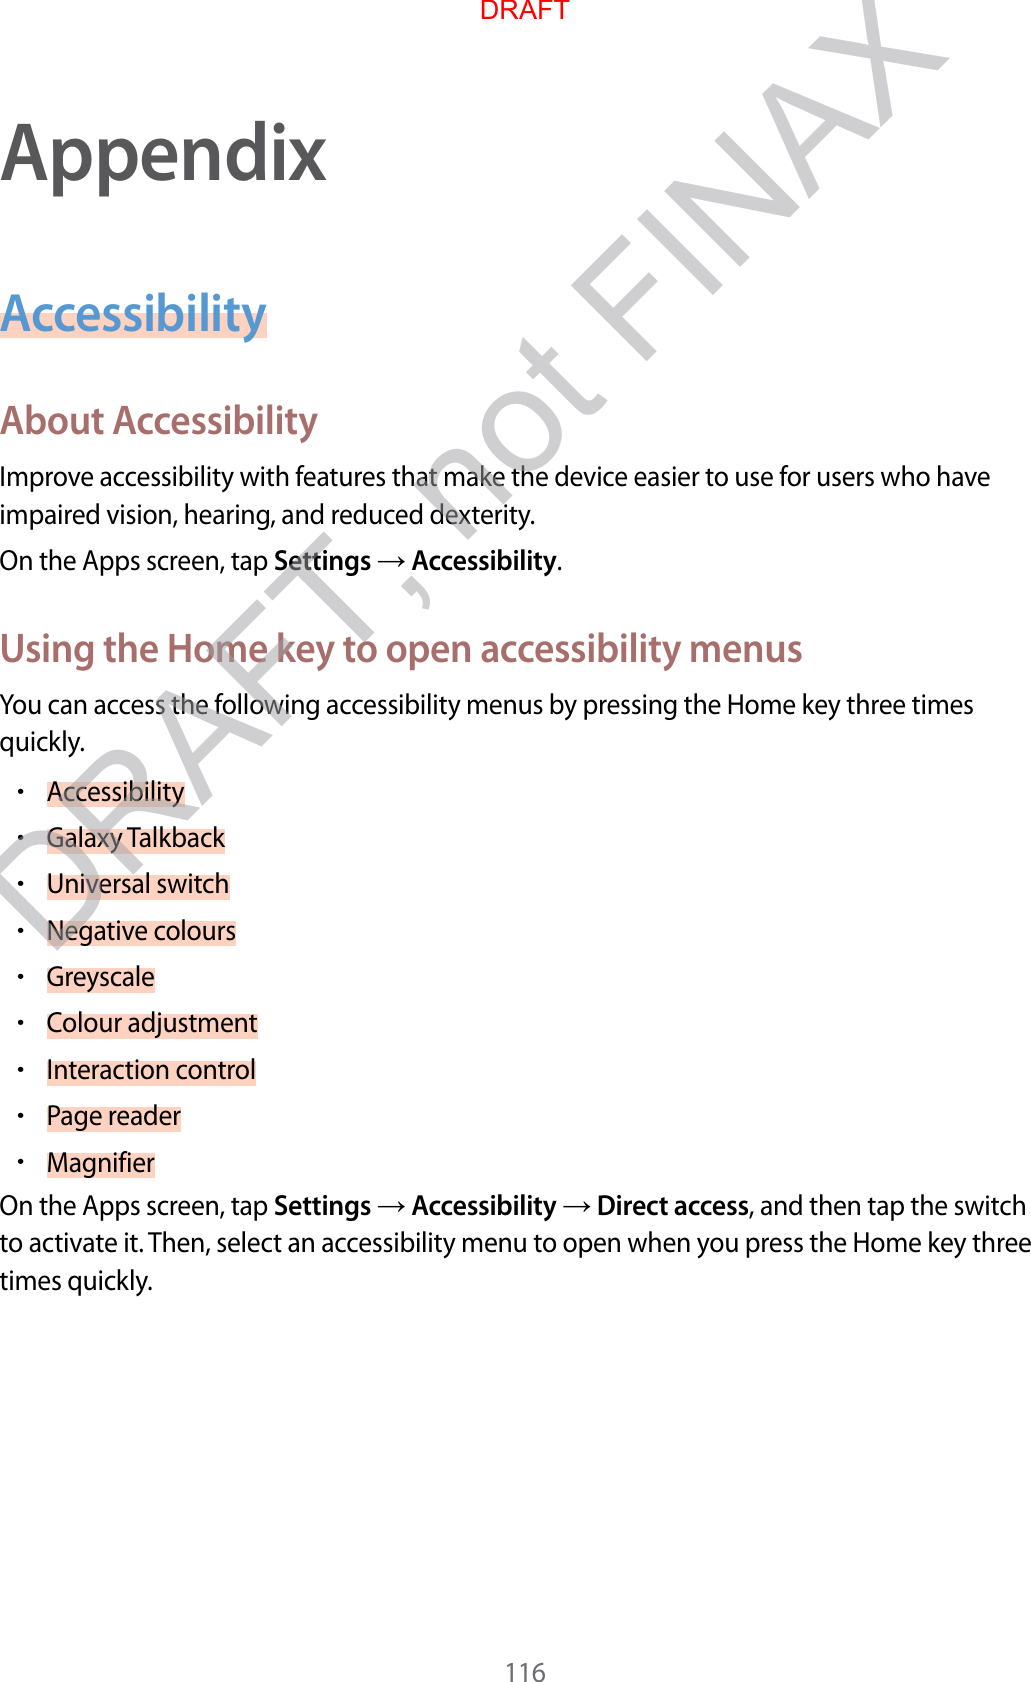 116AppendixAccessibilityAbout AccessibilityImprove accessibility with features that make the device easier to use for users who have impaired vision, hearing, and reduced dexterity.On the Apps screen, tap Settings  Accessibility.Using the Home key to open accessibility menusYou can access the following accessibility menus by pressing the Home key three times quickly.•Accessibility•Galaxy Talkback•Universal switch•Negative colours•Greyscale•Colour adjustment•Interaction control•Page reader•MagnifierOn the Apps screen, tap Settings  Accessibility  Direct access, and then tap the switch to activate it. Then, select an accessibility menu to open when you press the Home key three times quickly.DRAFTDRAFT, not FINAX